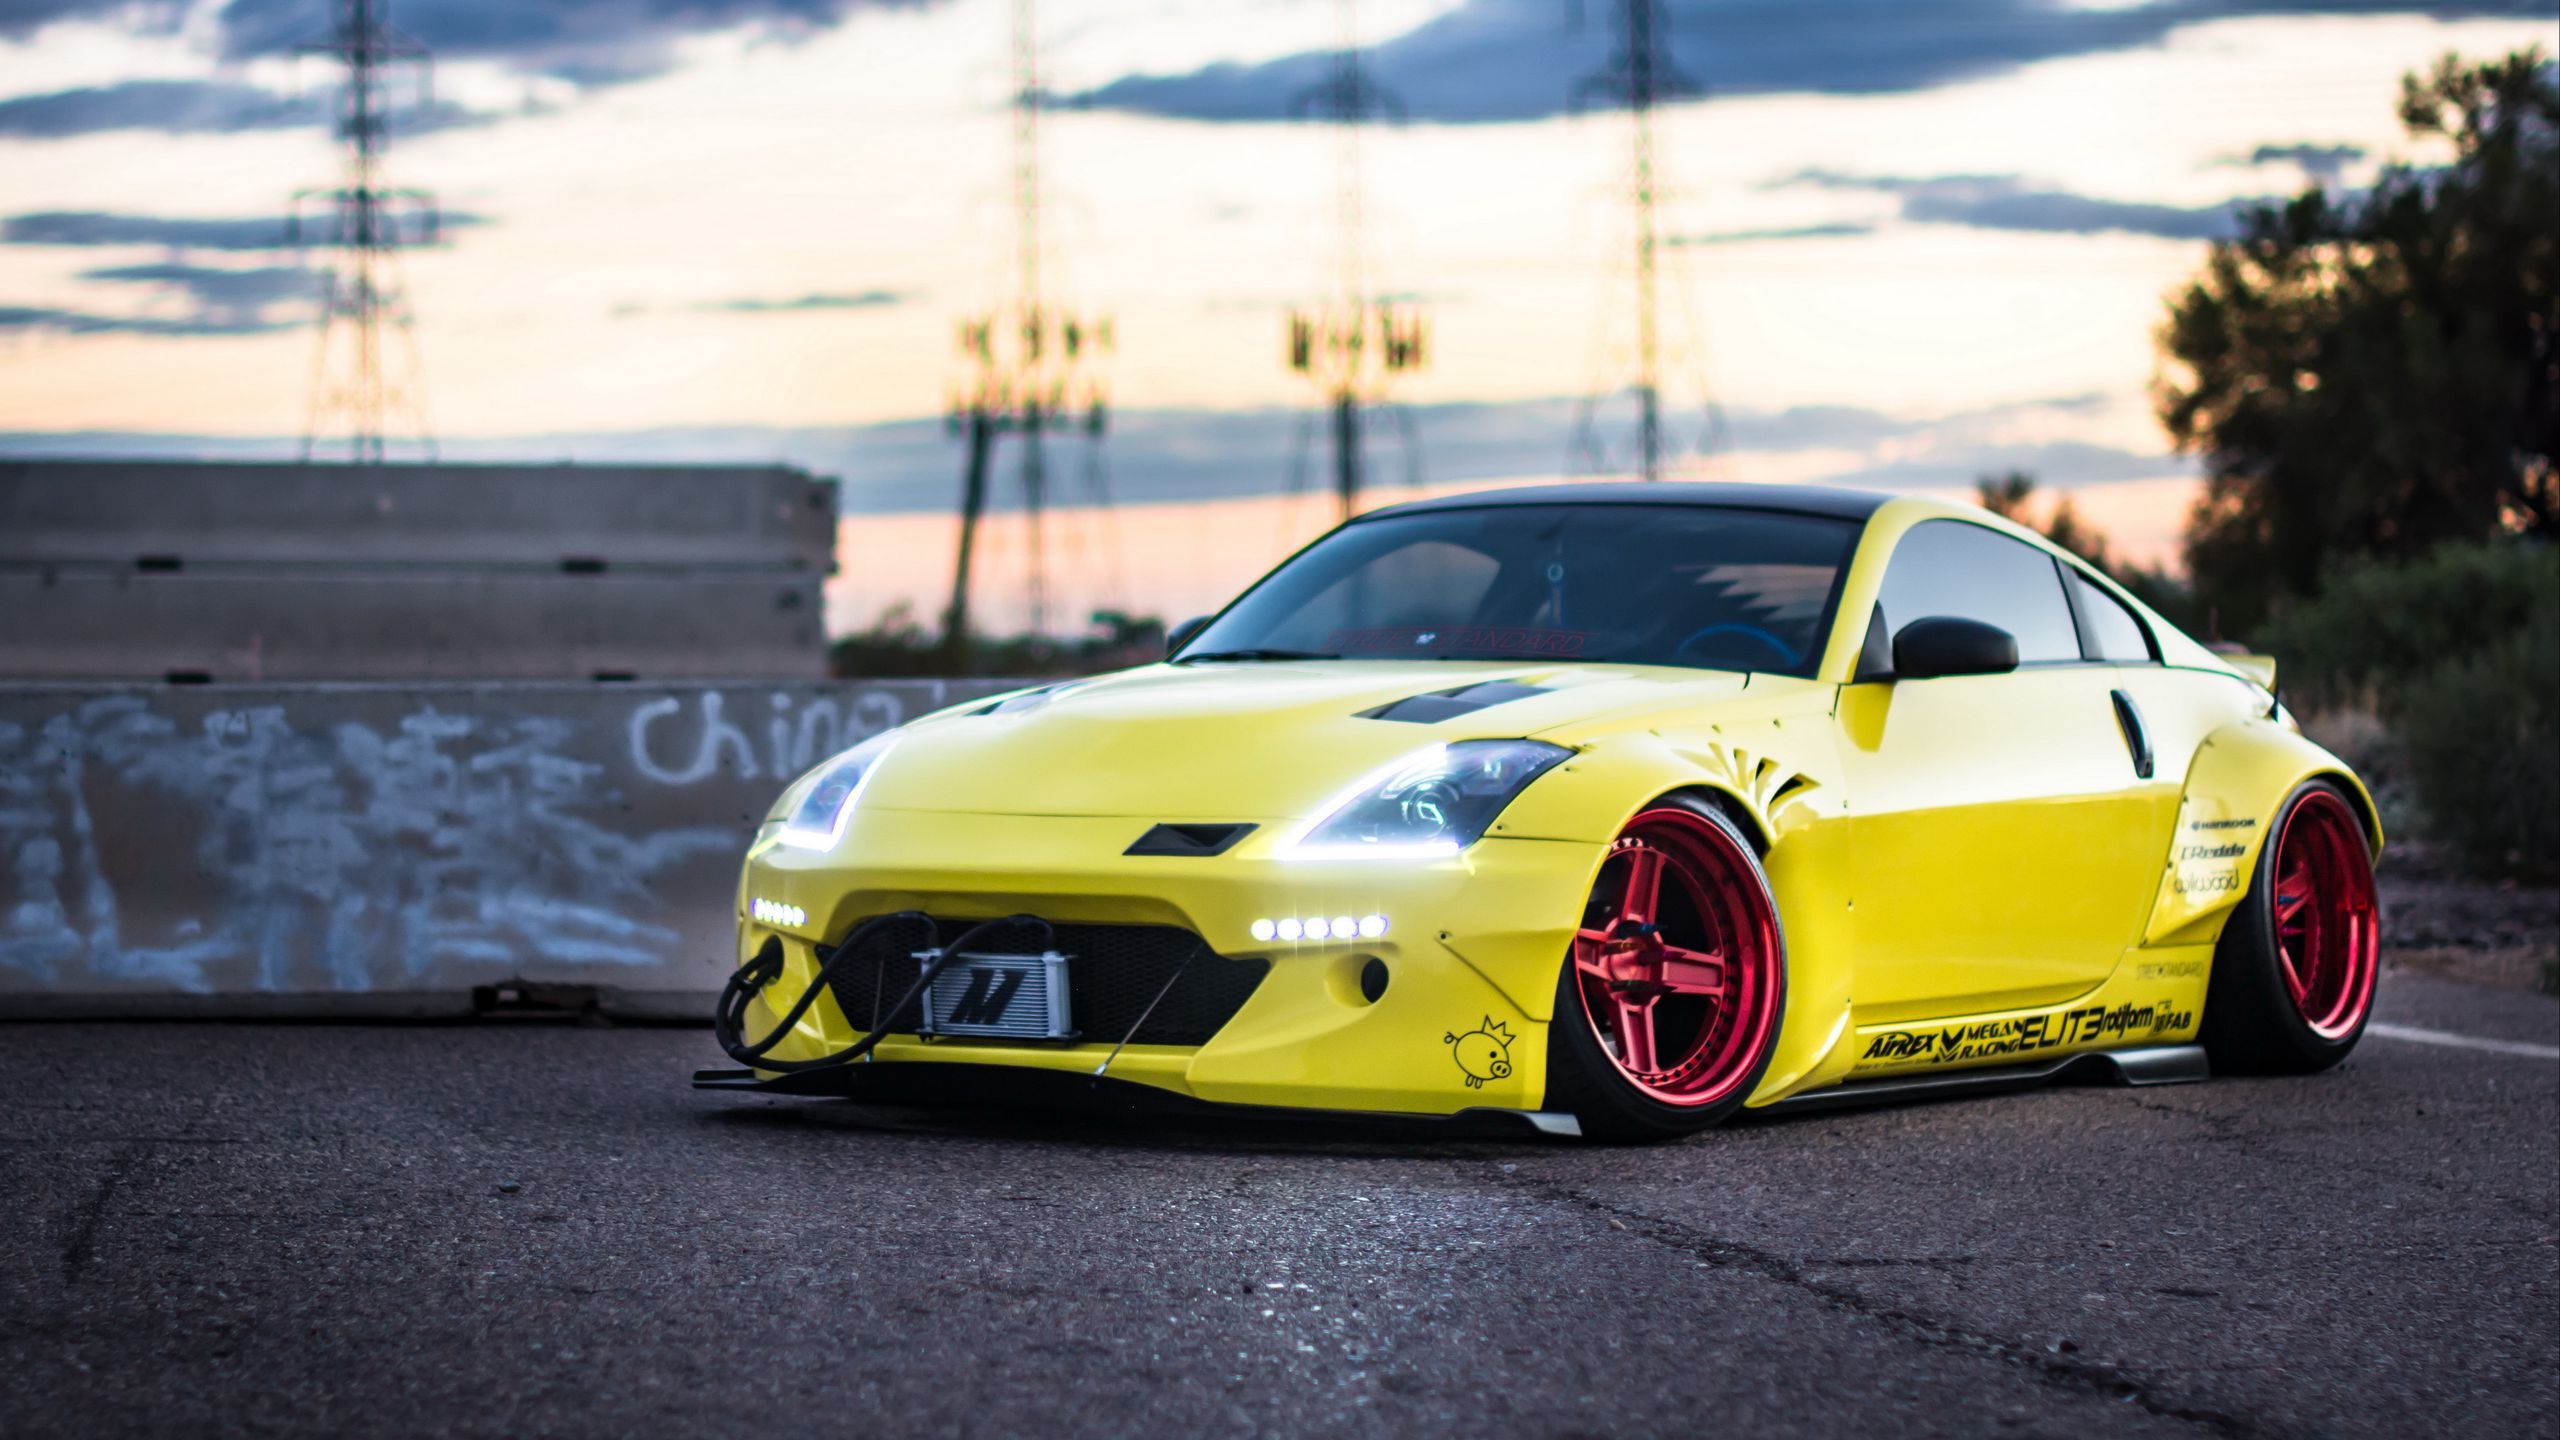 Download wallpaper 2560x1440 nissan 350z, yellow, side view widescreen 16:9 HD background